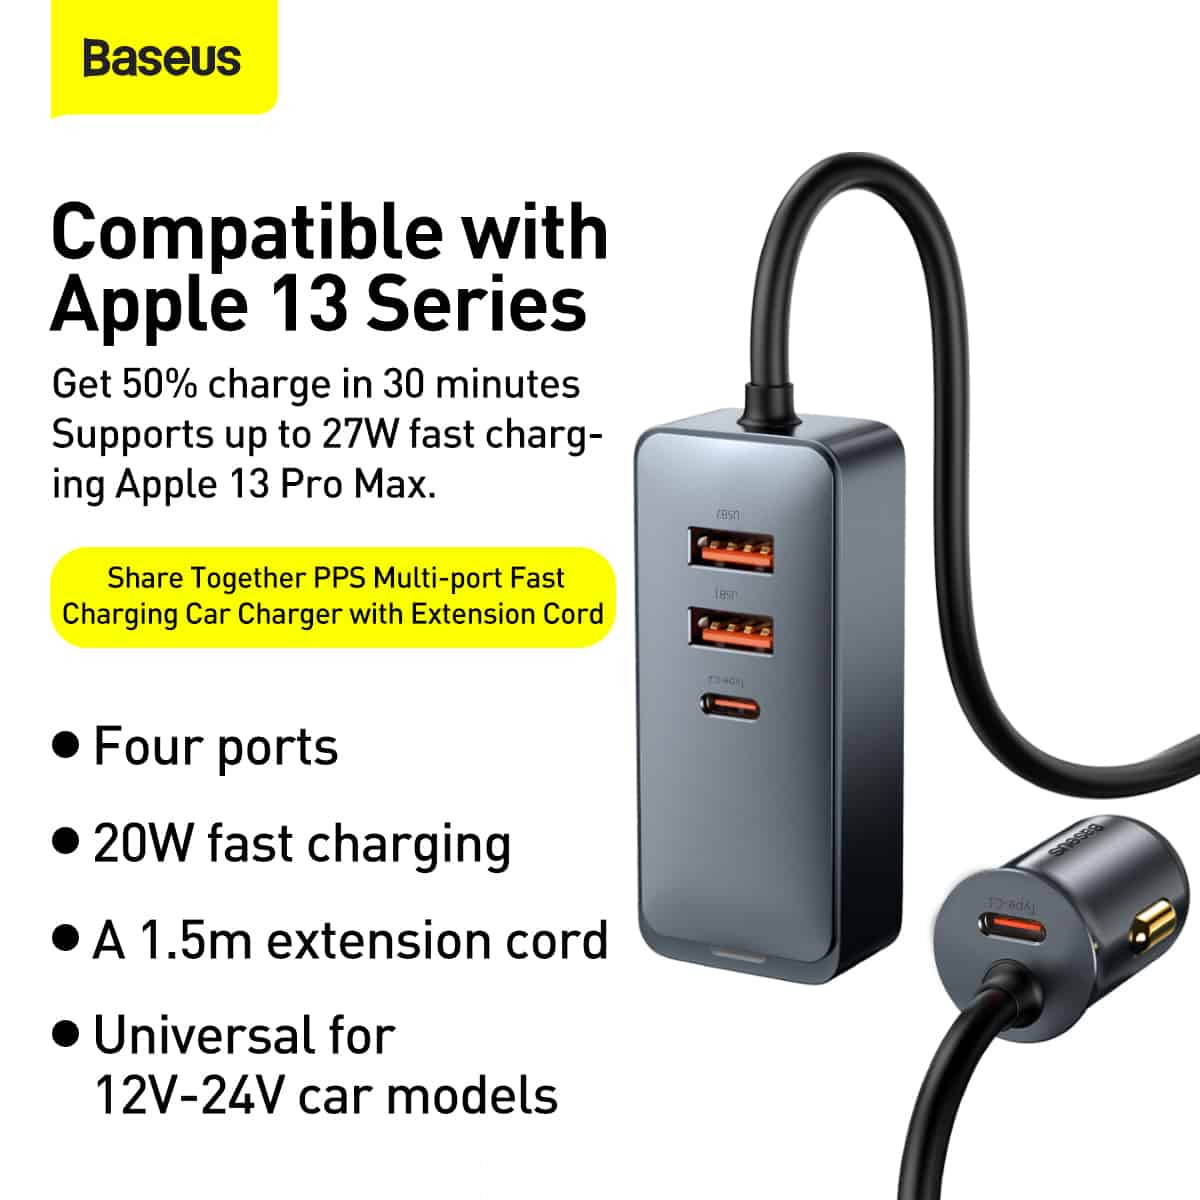 Baseus Share Together Multi Ports Fast Car Charger